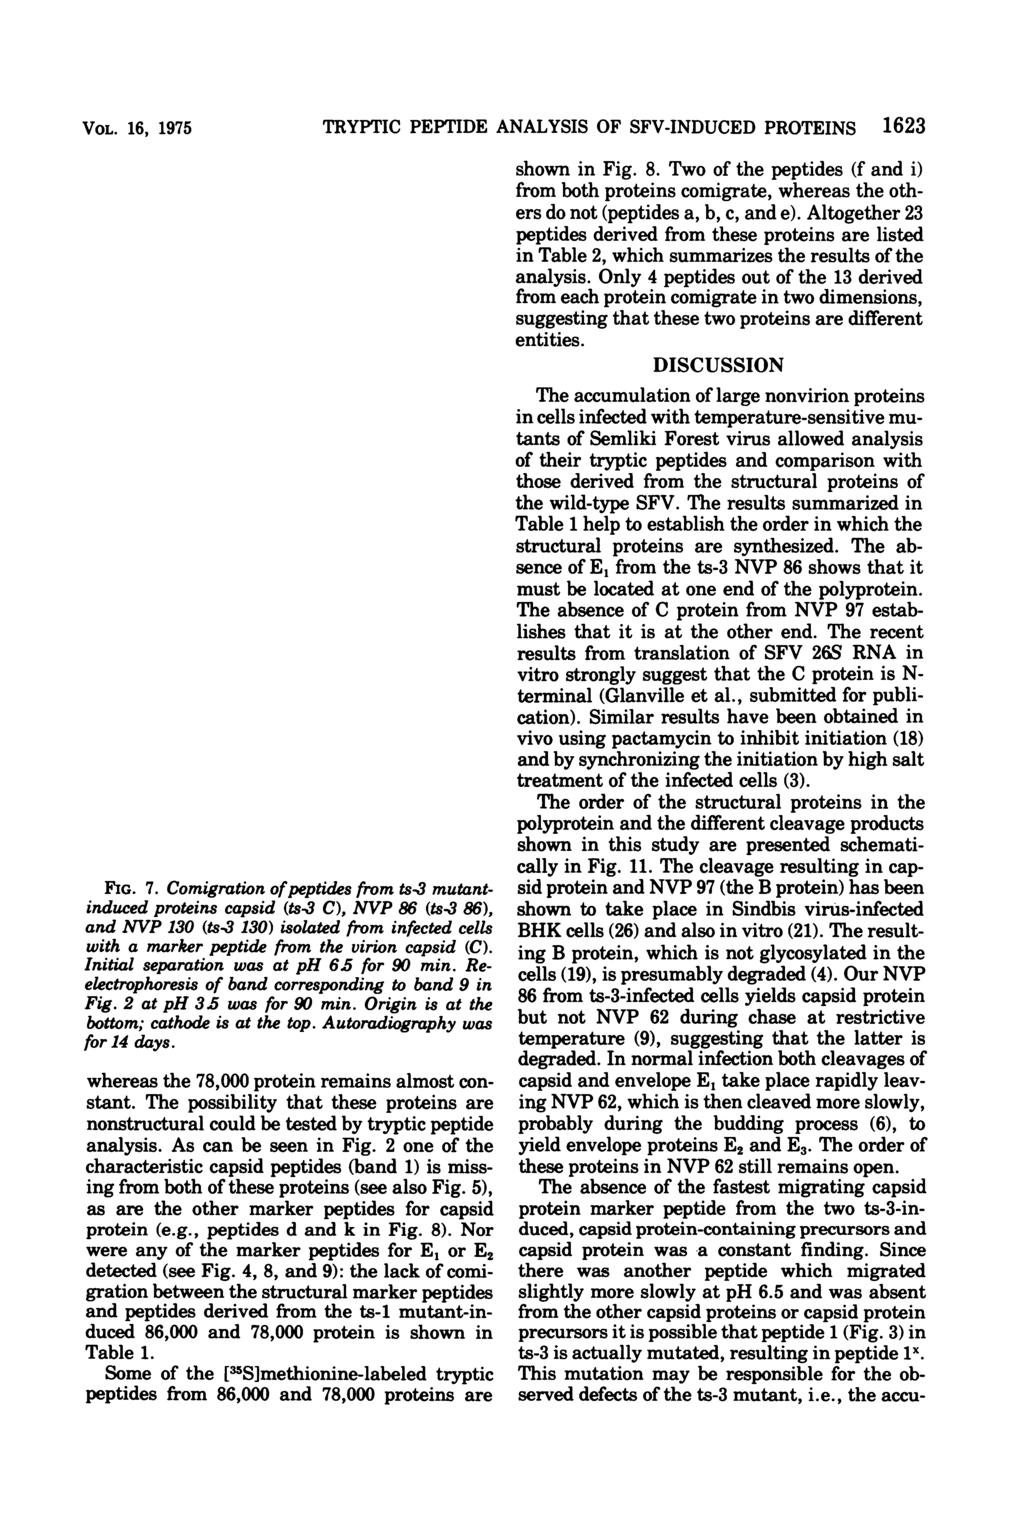 VOL. 16, 1975 ts-3 130 TRYPTIC PEPTIDE ANALYSIS OF SFV-INDUCED PROTEINS 1623 ts-3 C C ts-3 86 FIG. 7.